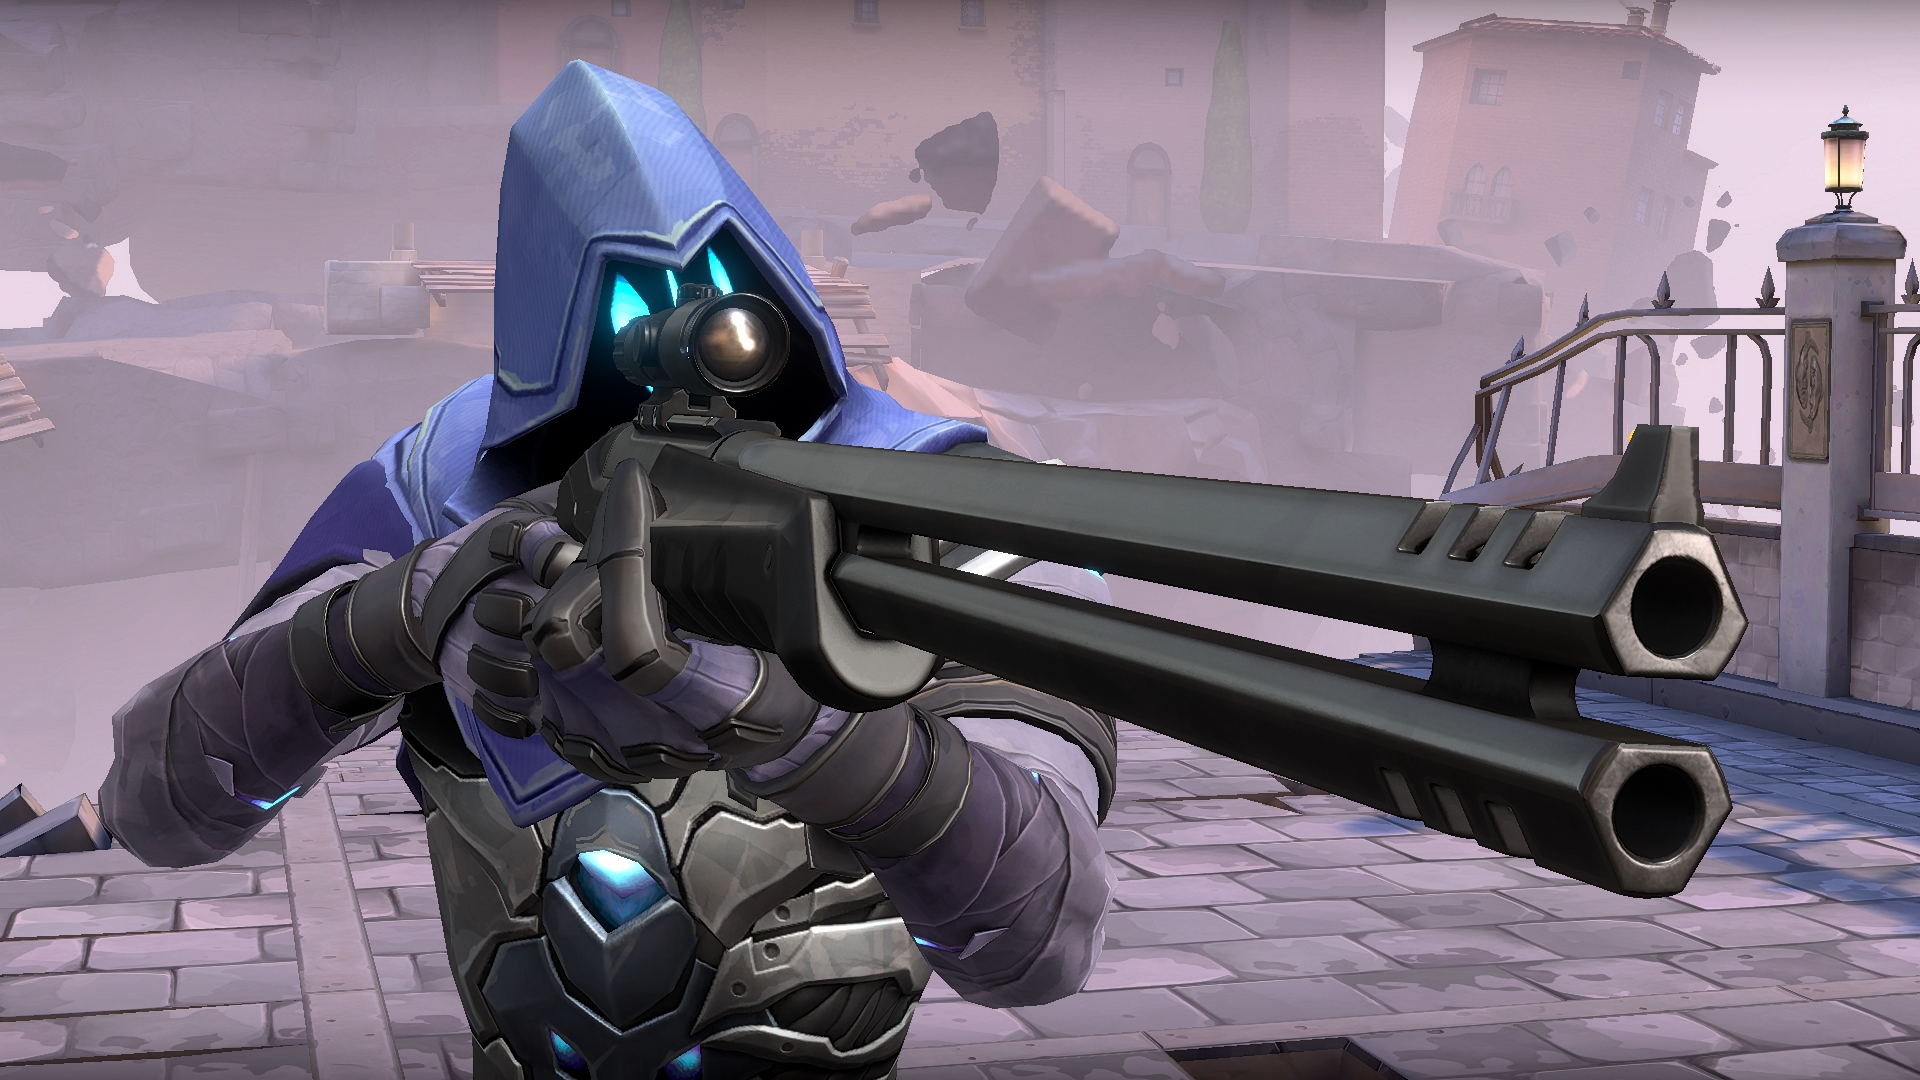 A Valorant agent holds the new sniper rifle weapon Outlaw.